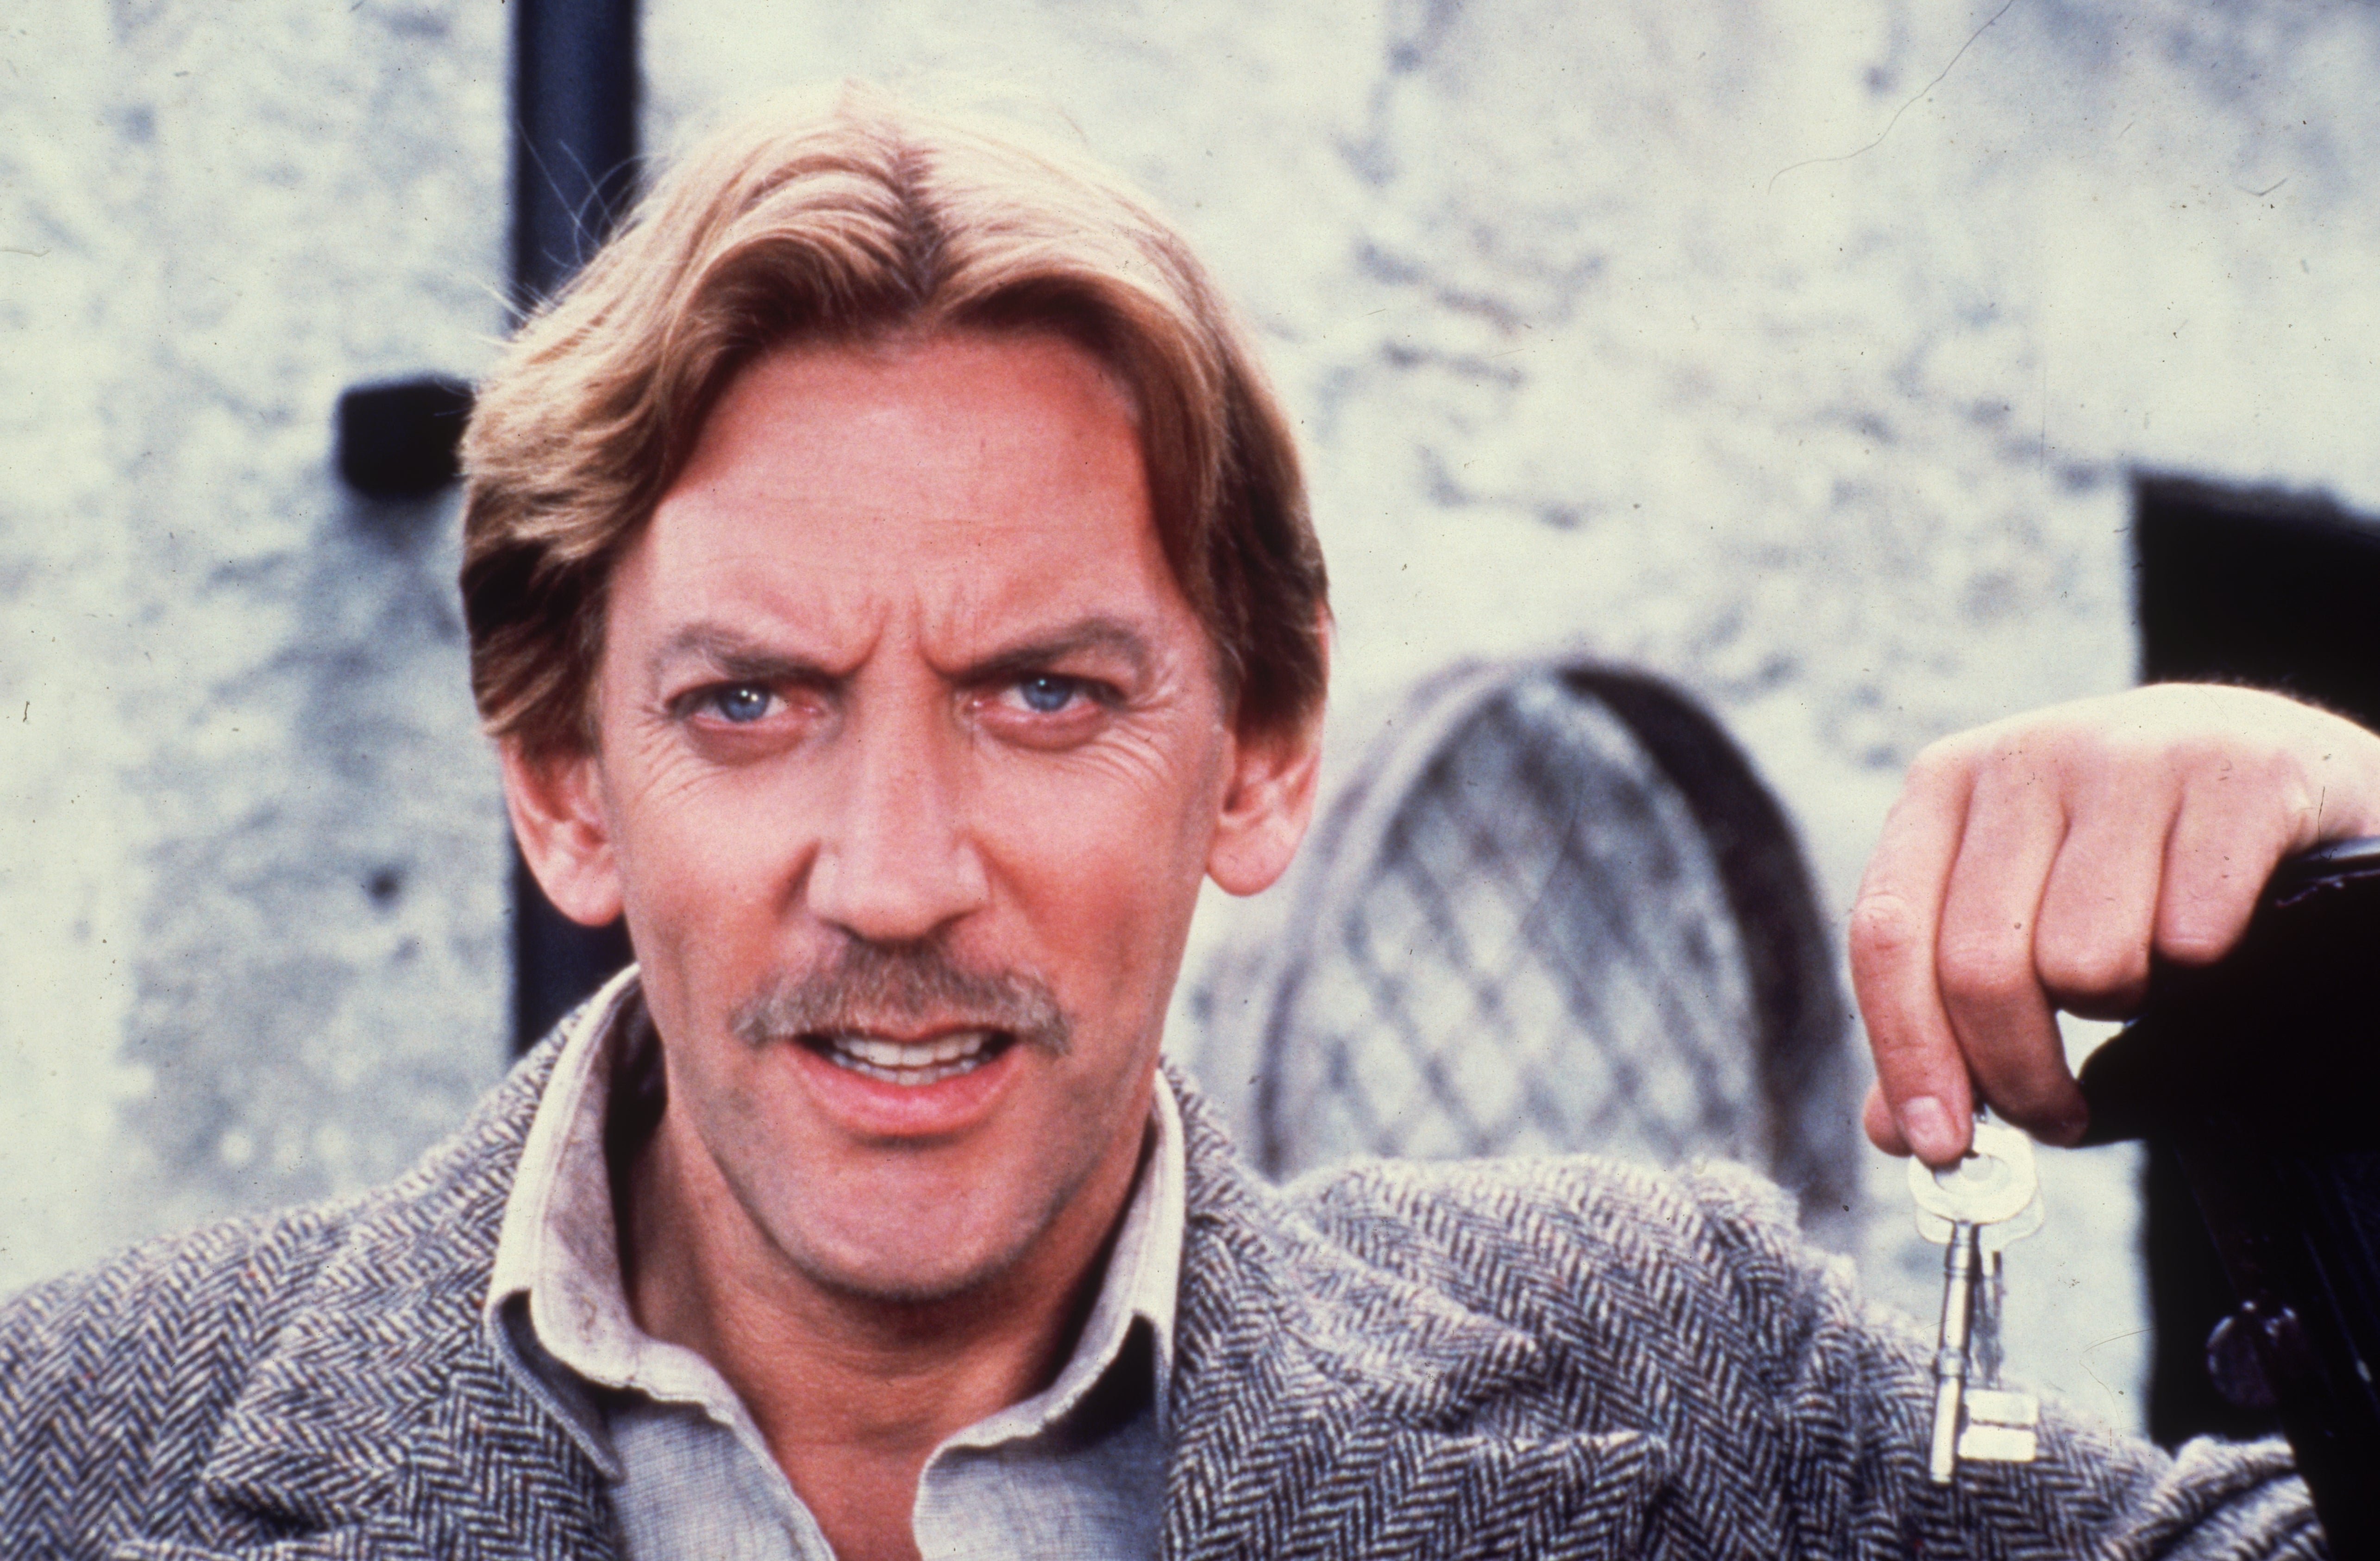 Donald Sutherland (pictured circa 1975) described his early work as ‘a meandering little career,’ which included roles in low-budget horror flicks, before breaking into Hollywood